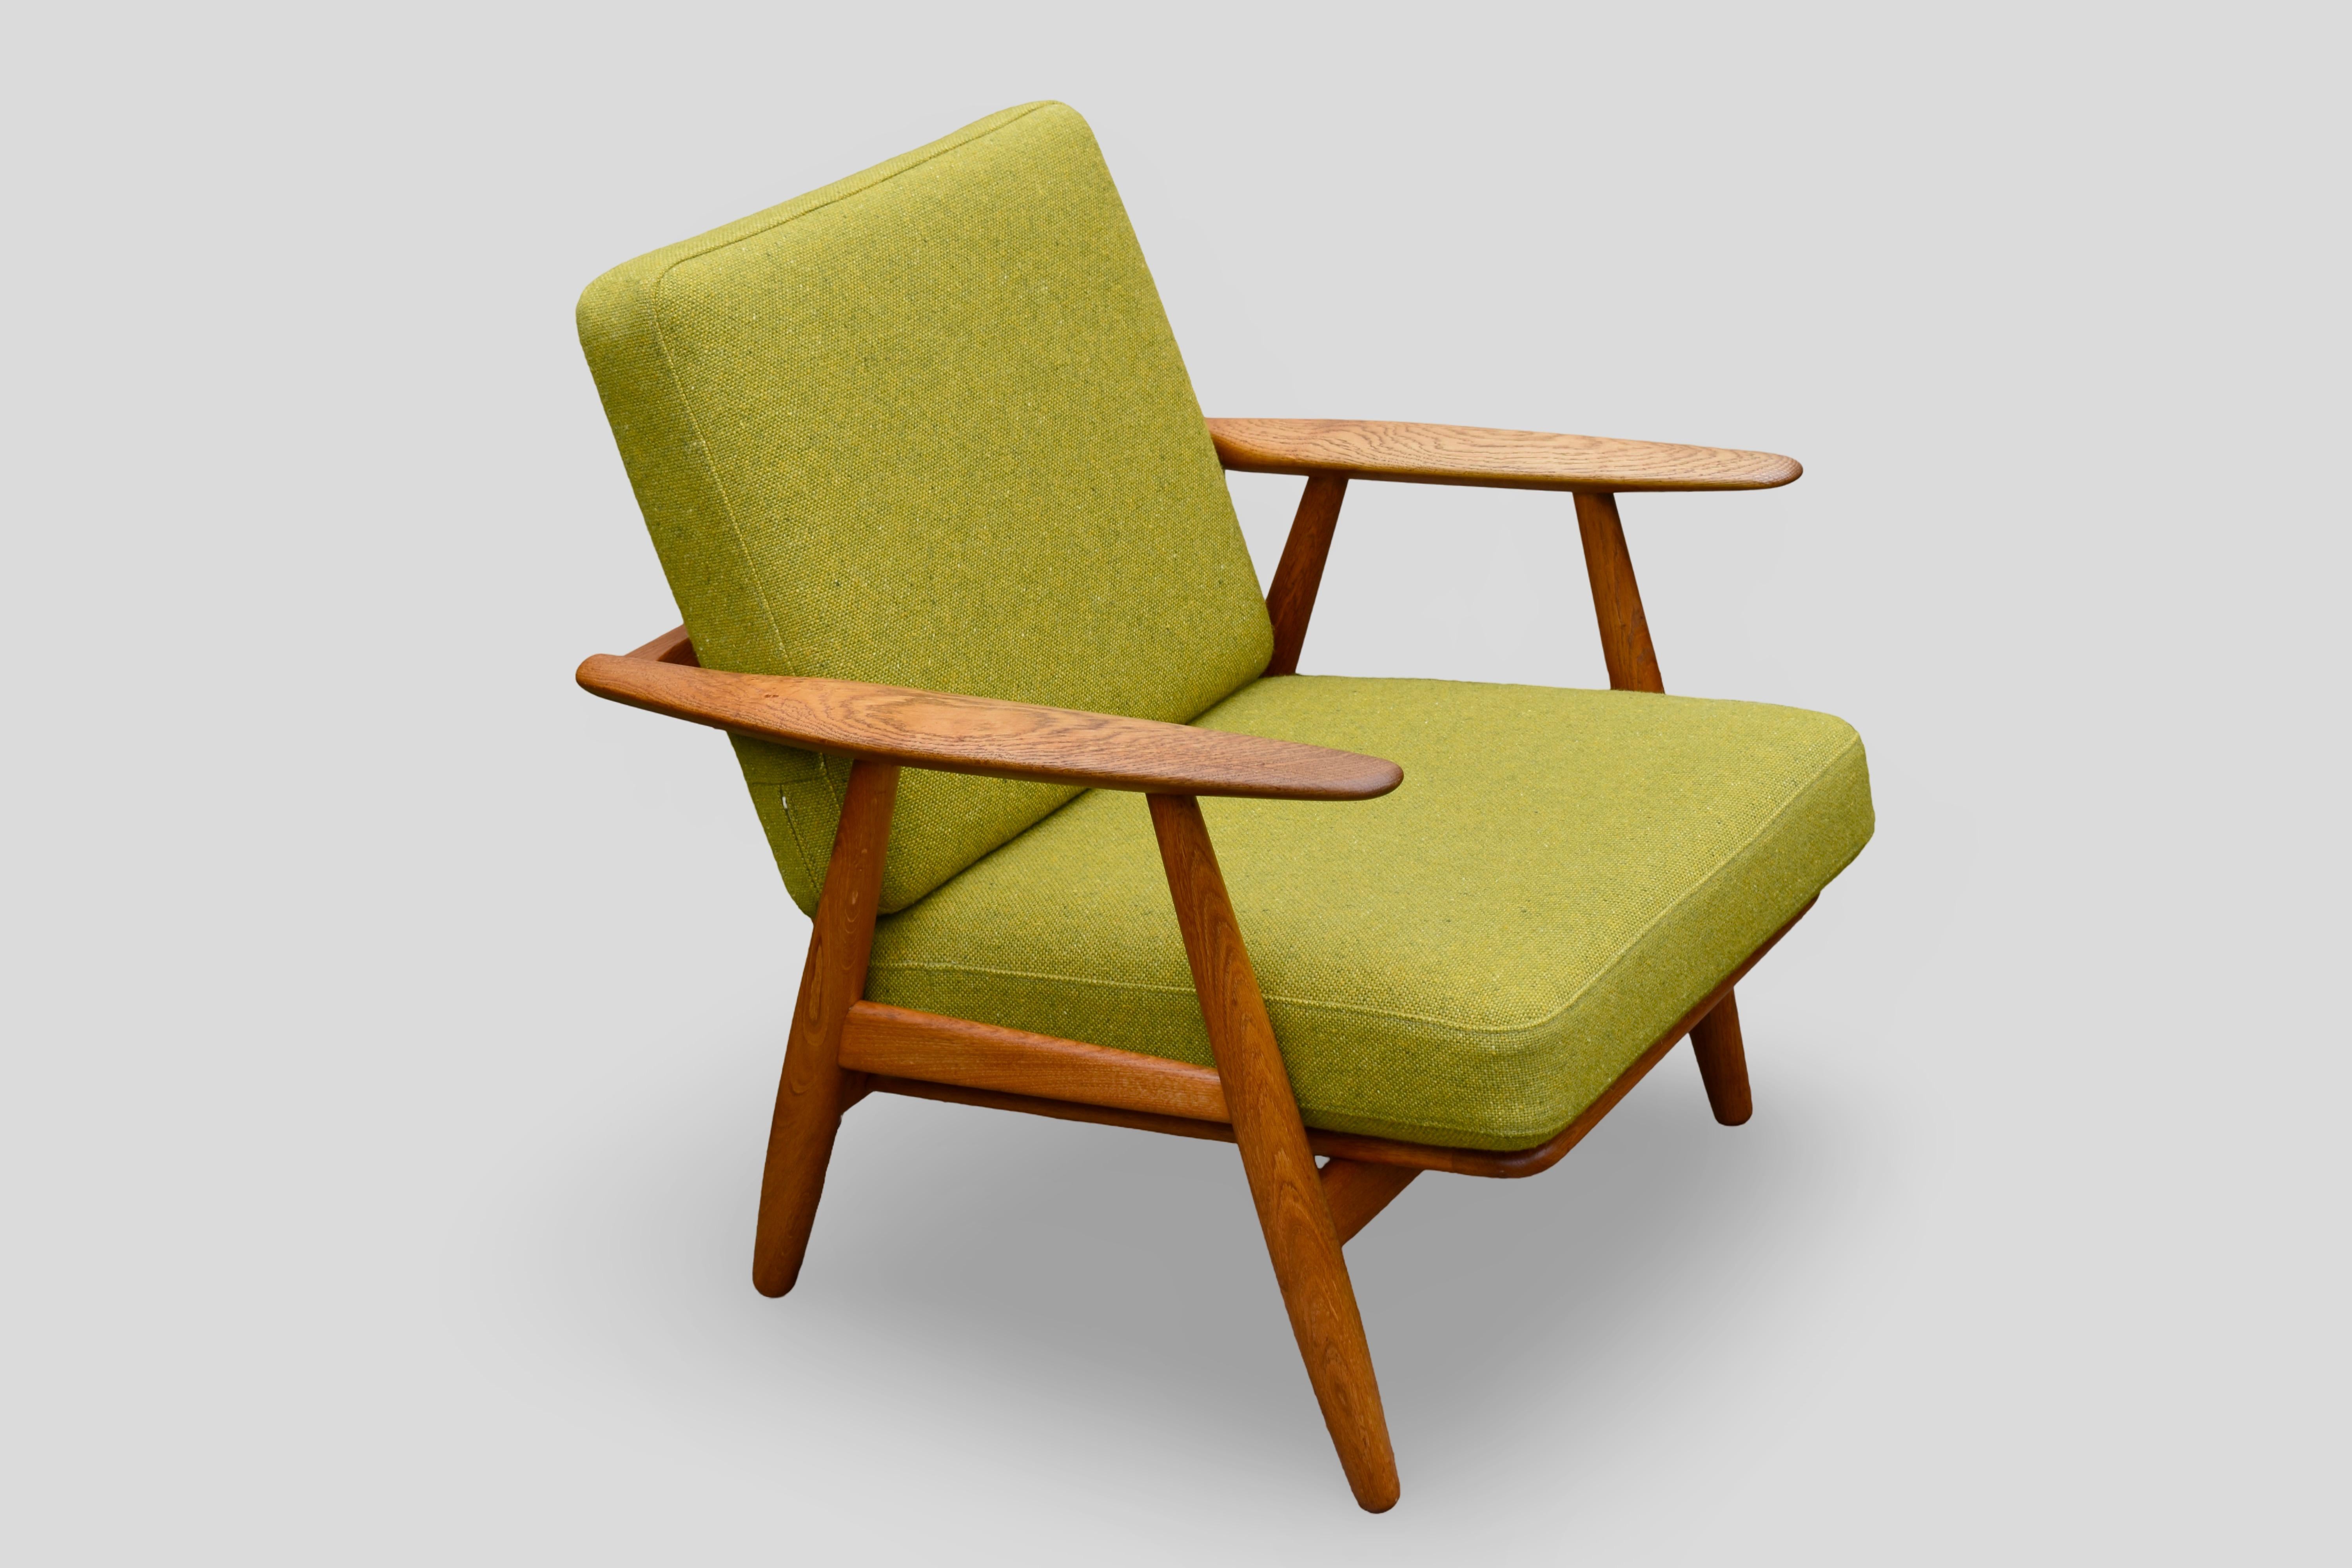 Classic design from 1954 by the master of Danish Modern, Hans Wegner.

Solid Oak frame with original sprung cushions upholstered in a high quality tweed wool very sympathetic to the fabrics originally used in the 50’s.

A particularly nice example